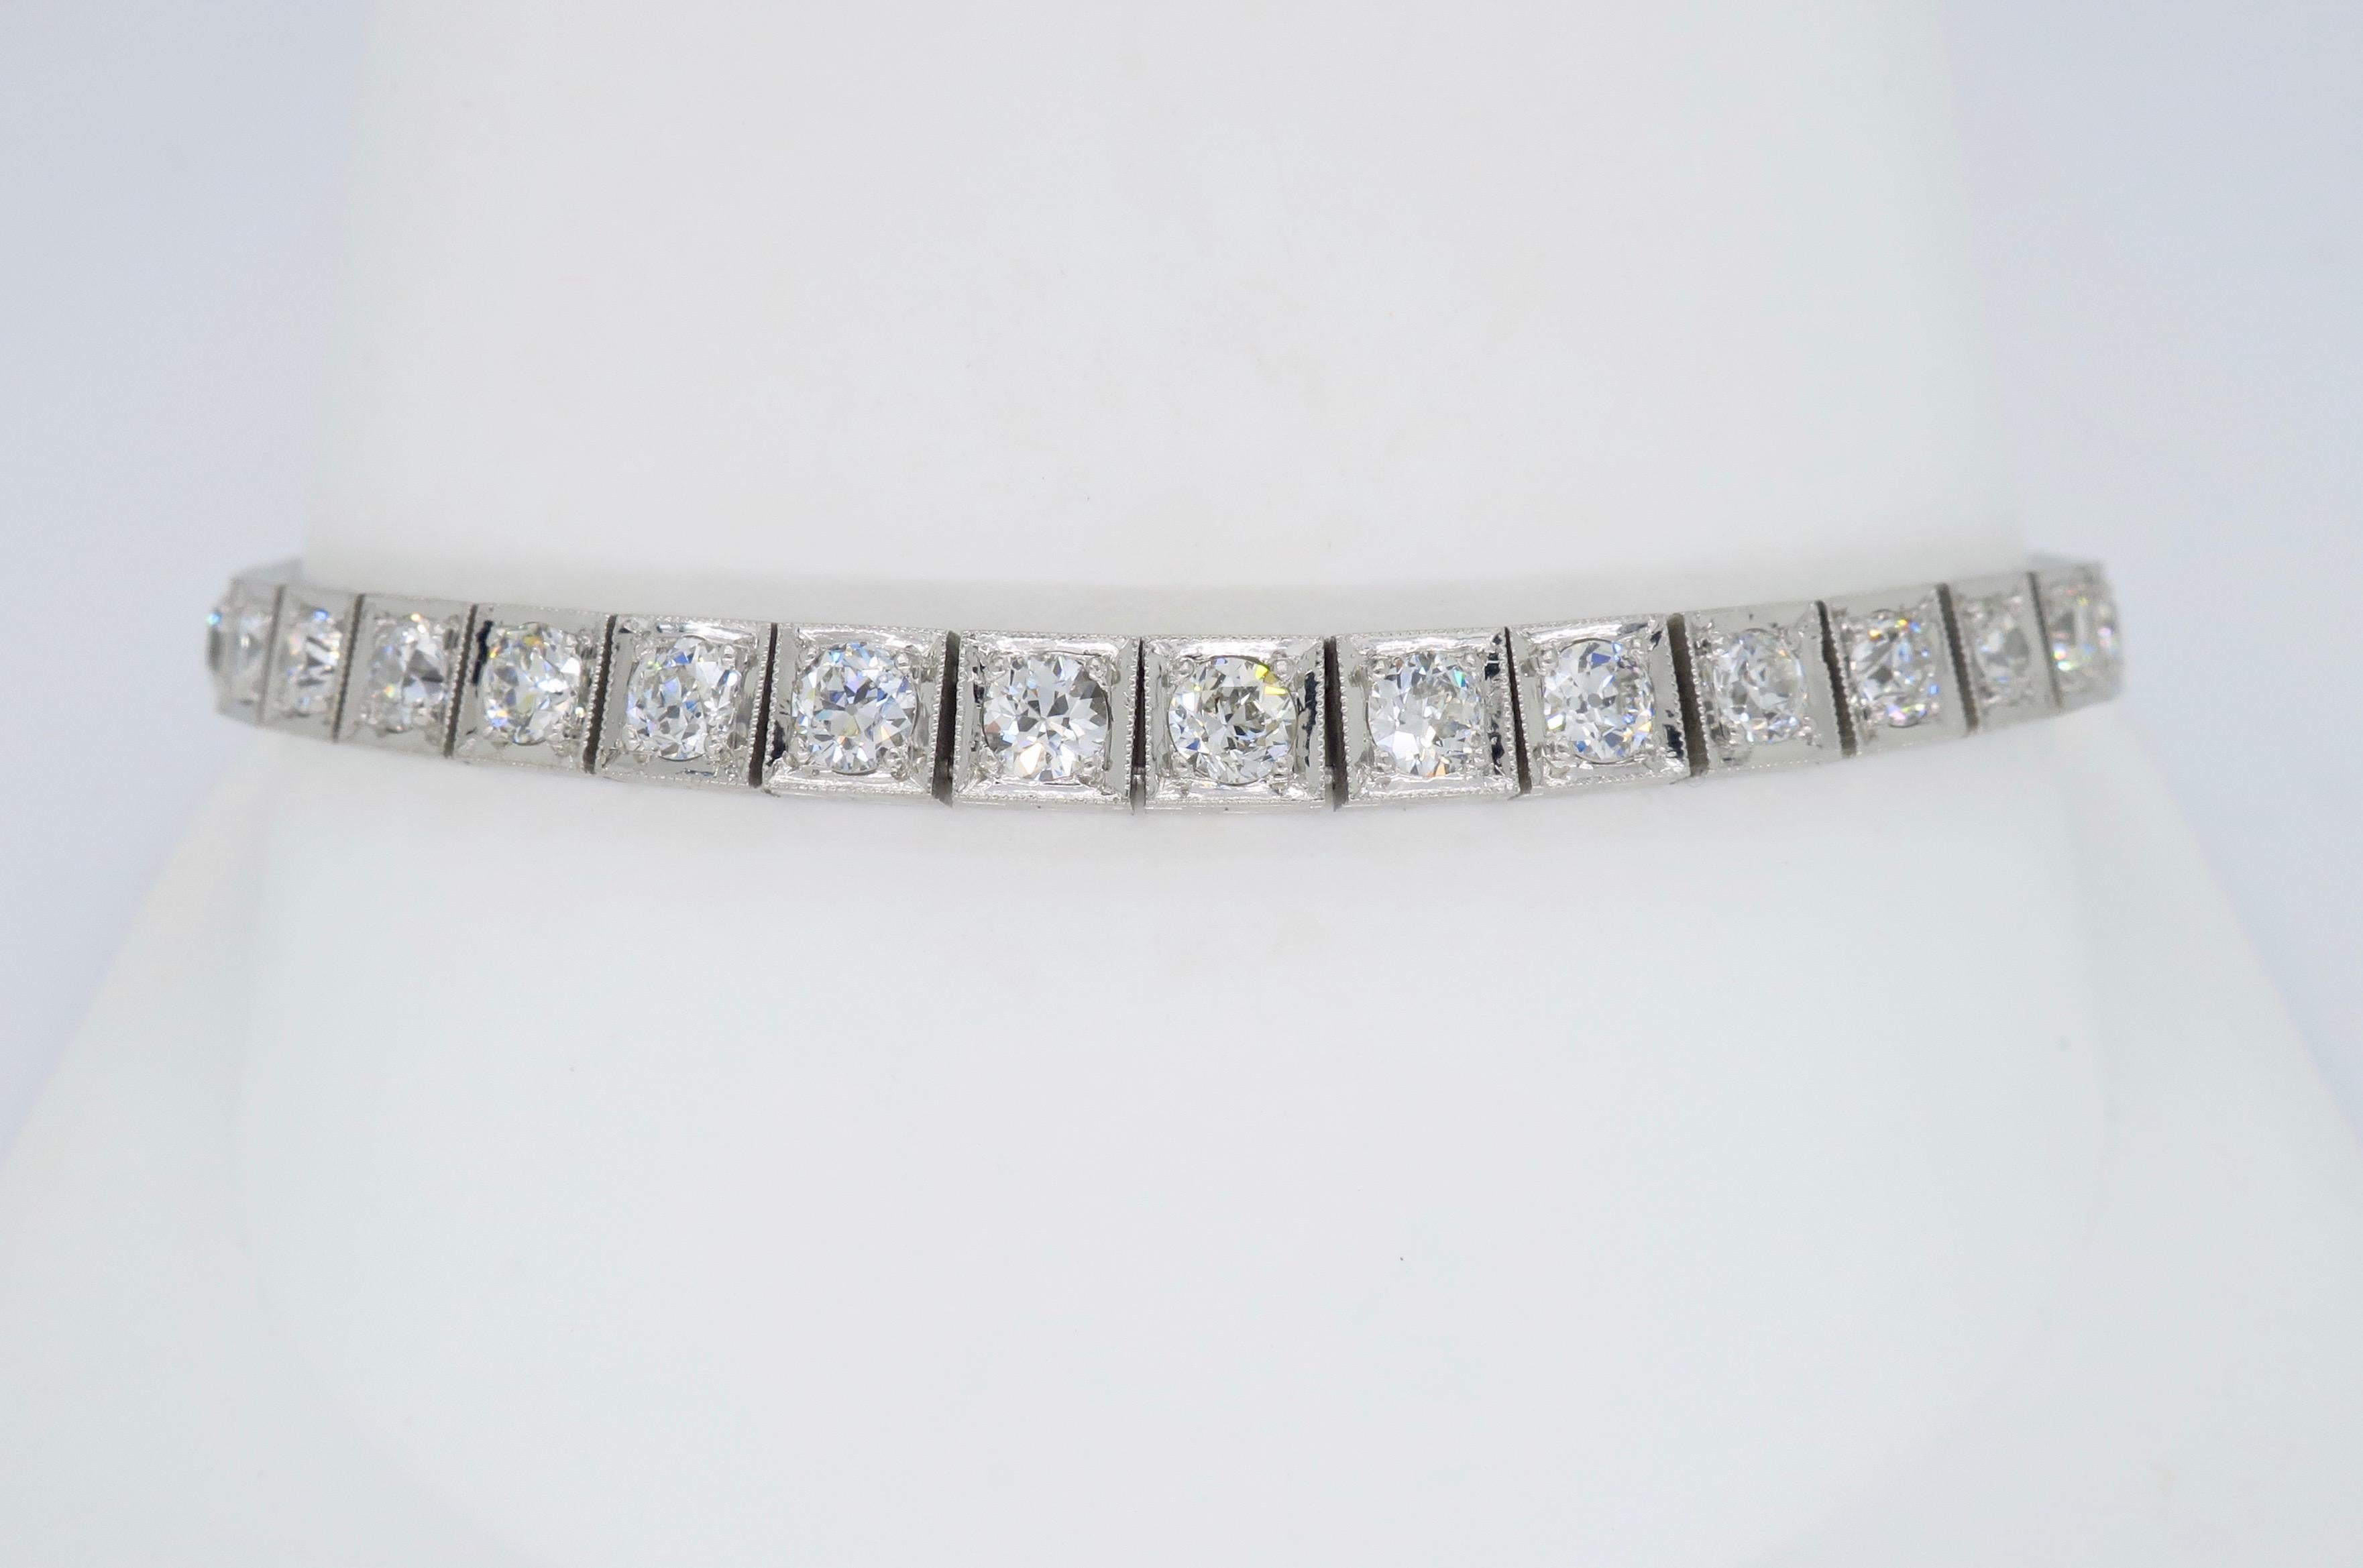 Platinum approximately 5.85CTW Old European Cut diamond tennis bracelet.

Diamond Carat Weight: Approximately 5.85CTW
Diamond Cut: 37 Old European Cut Diamonds
Color: Average G-I
Clarity: Average VS-SI
Metal: Platinum
Marked/Tested: Tested